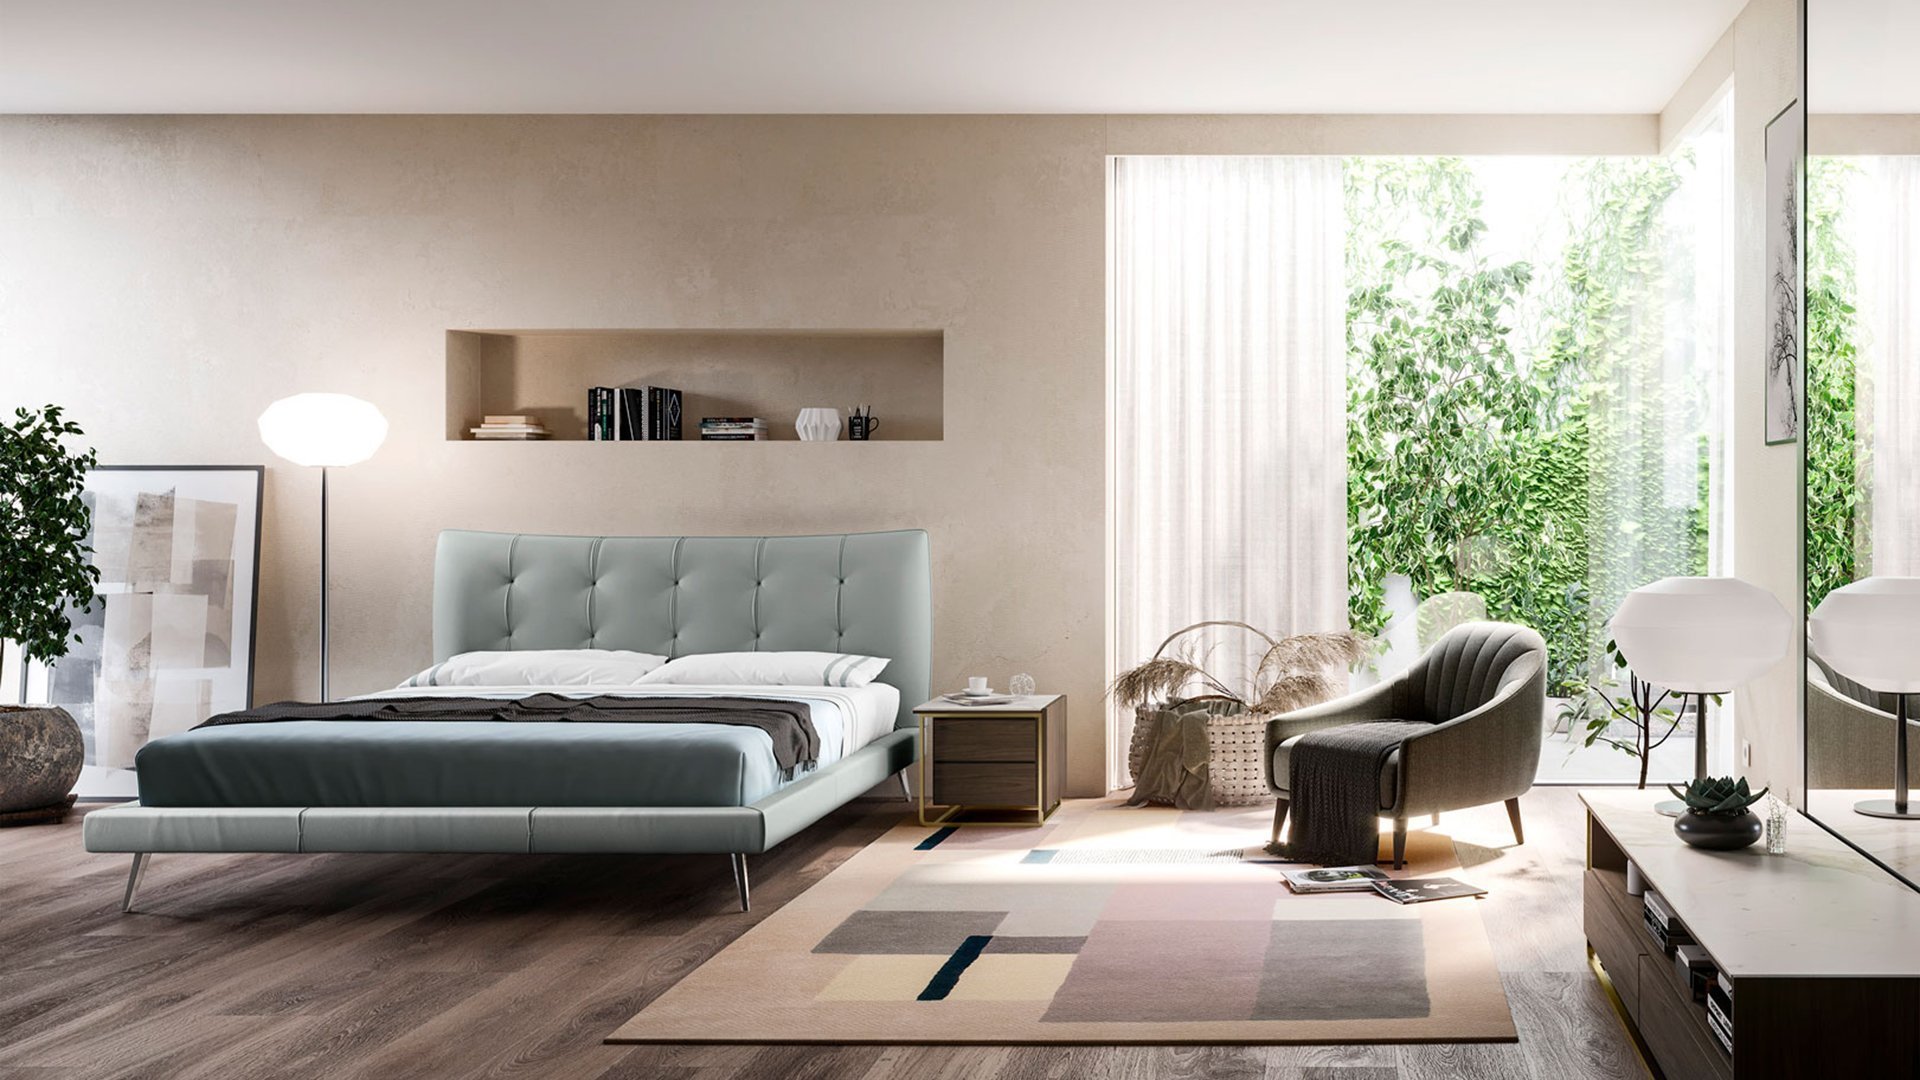 Natuzzi Editions beds bedroom furniture italian cyprus Takis Angelides Furnihome beds with storage